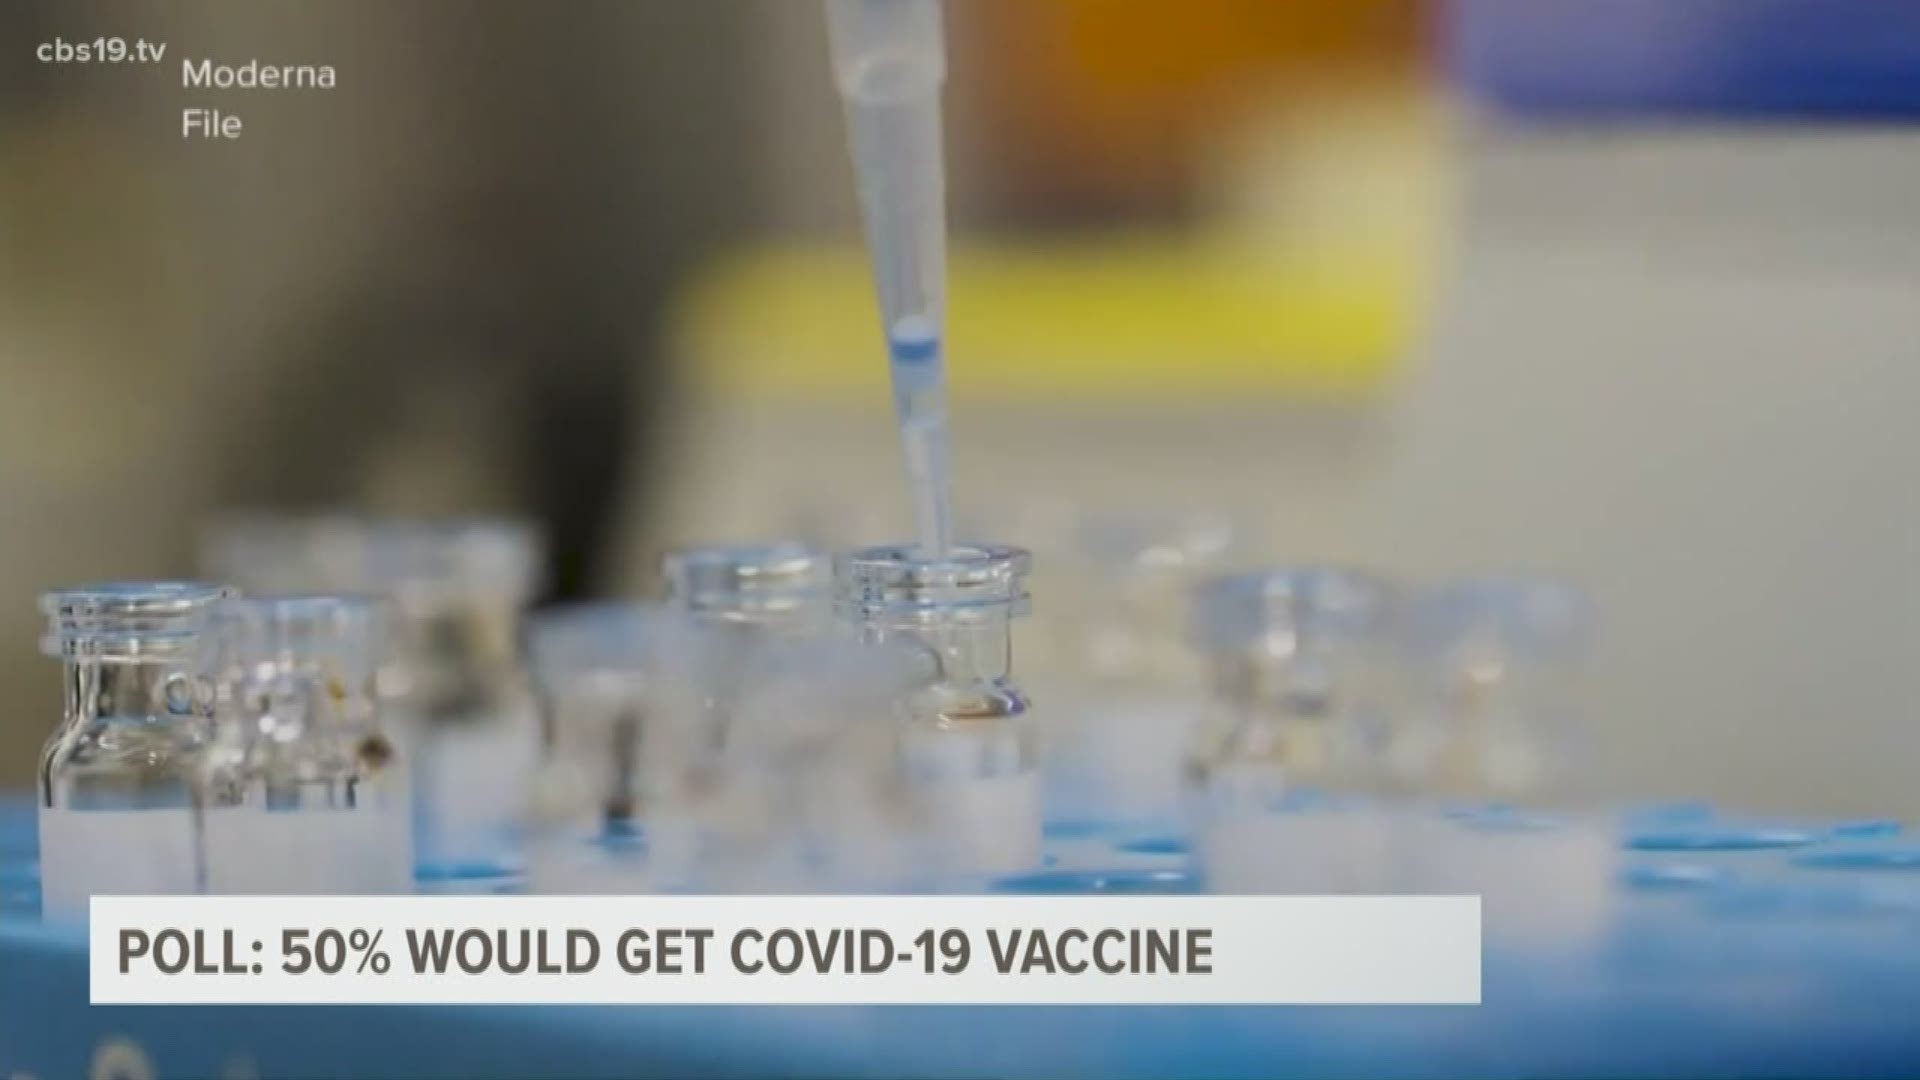 A survey from the Associated Press and University of Chicago showed that about half of respondents plan to get a COVID-19 vaccine, while 20% said they would refuse.